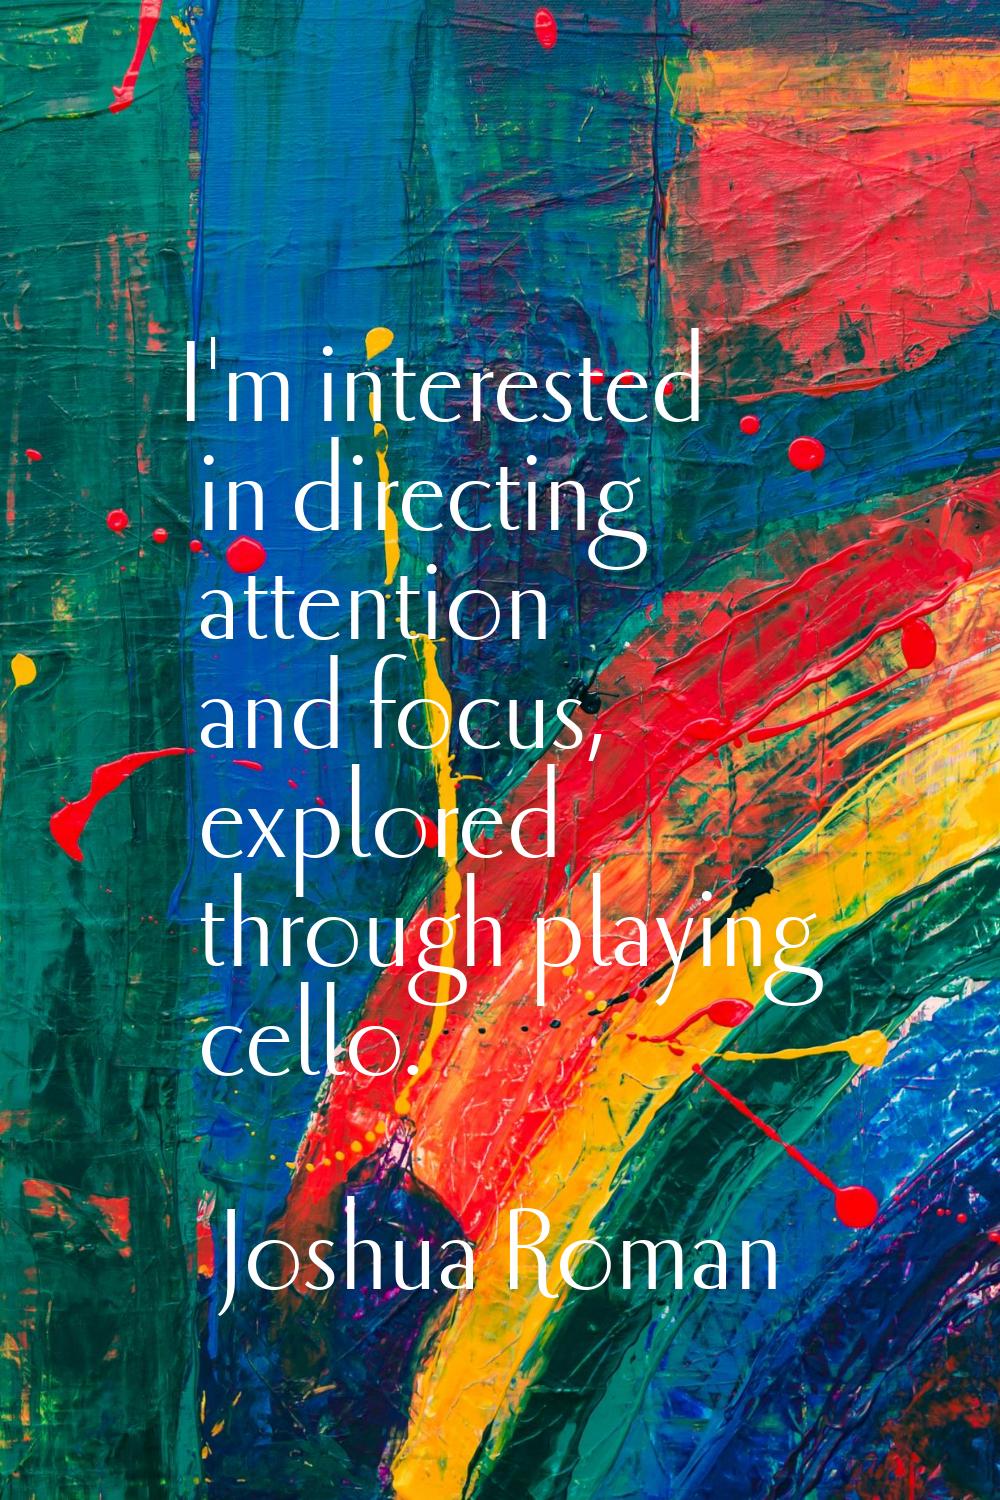 I'm interested in directing attention and focus, explored through playing cello.